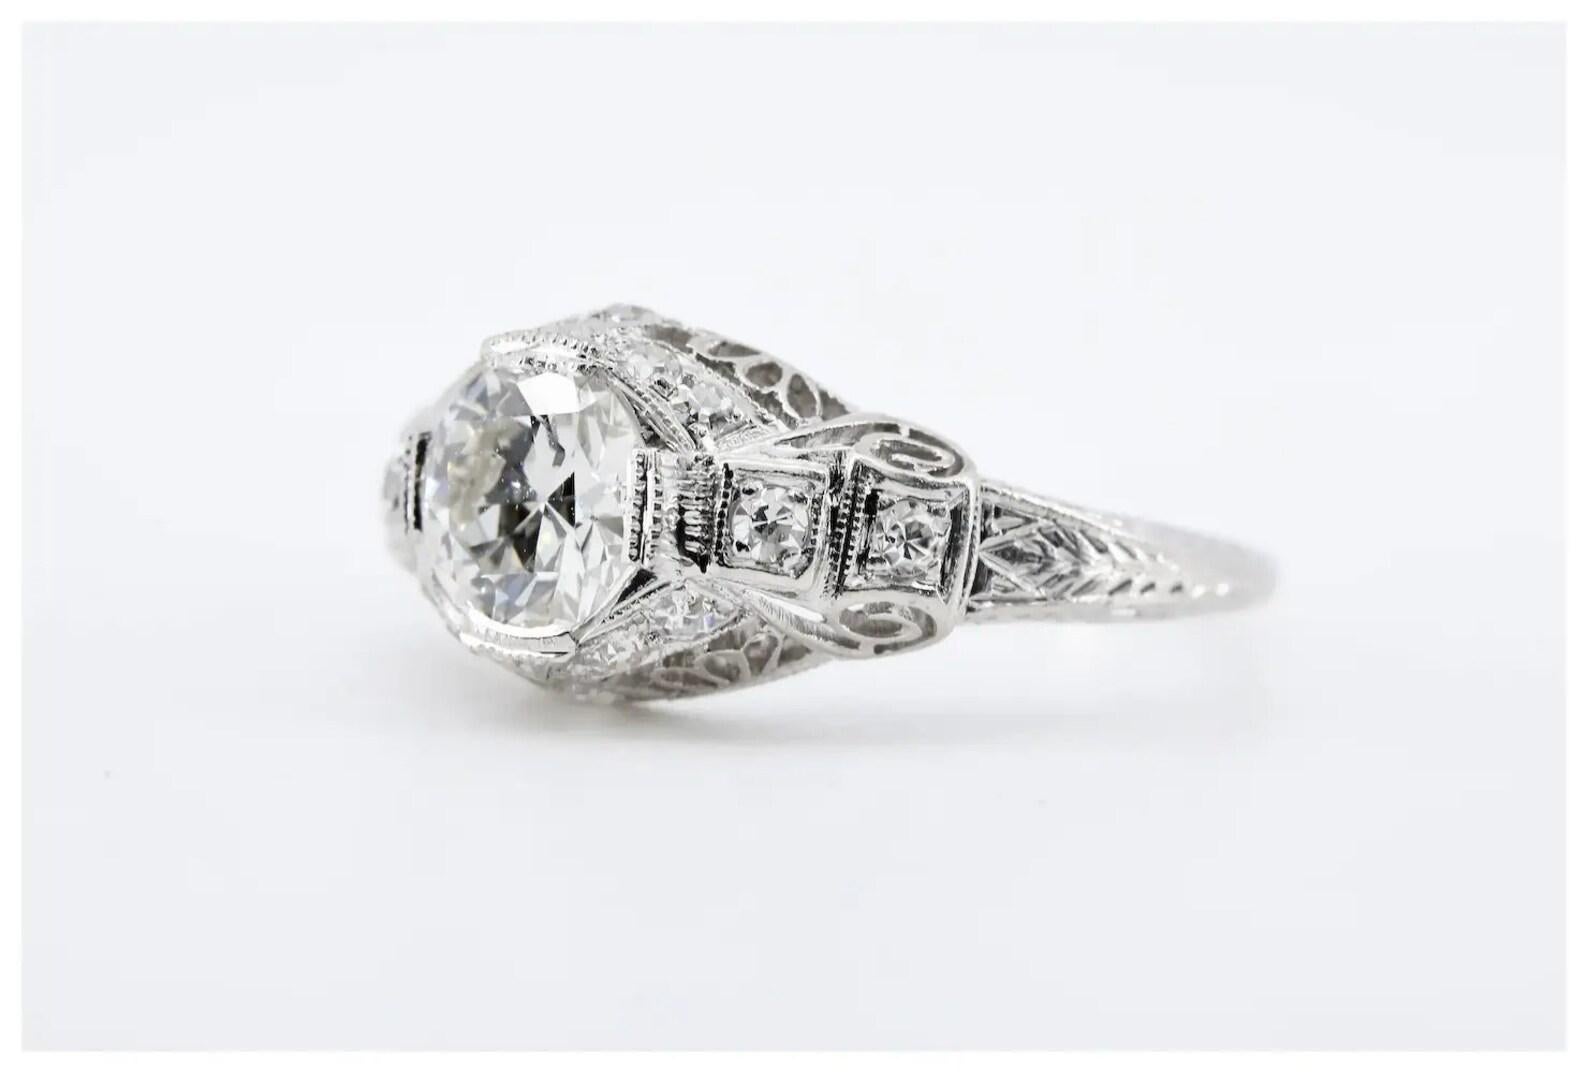 
An Art Deco period handmade filigree engagement ring crafted in lustrous platinum.

Centered by a GIA certified 0.85 Carat round Circular Brilliant cut diamond of I color, and VS2 clarity.

Accented throughout by 14 pave set diamonds of 0.21ctw